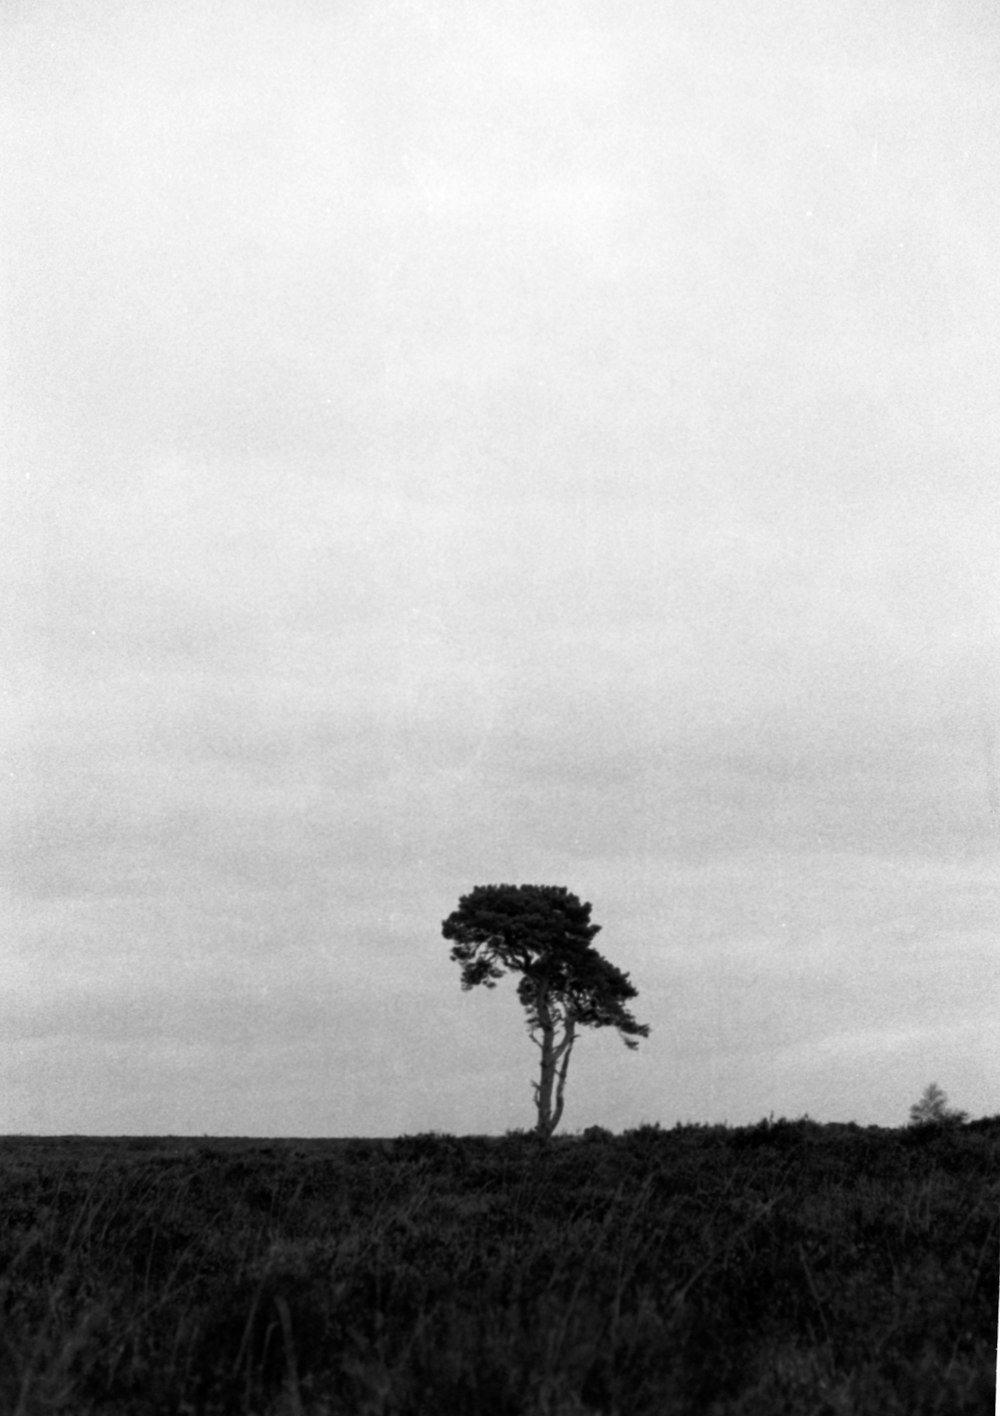 a lone tree in a field with a cloudy sky